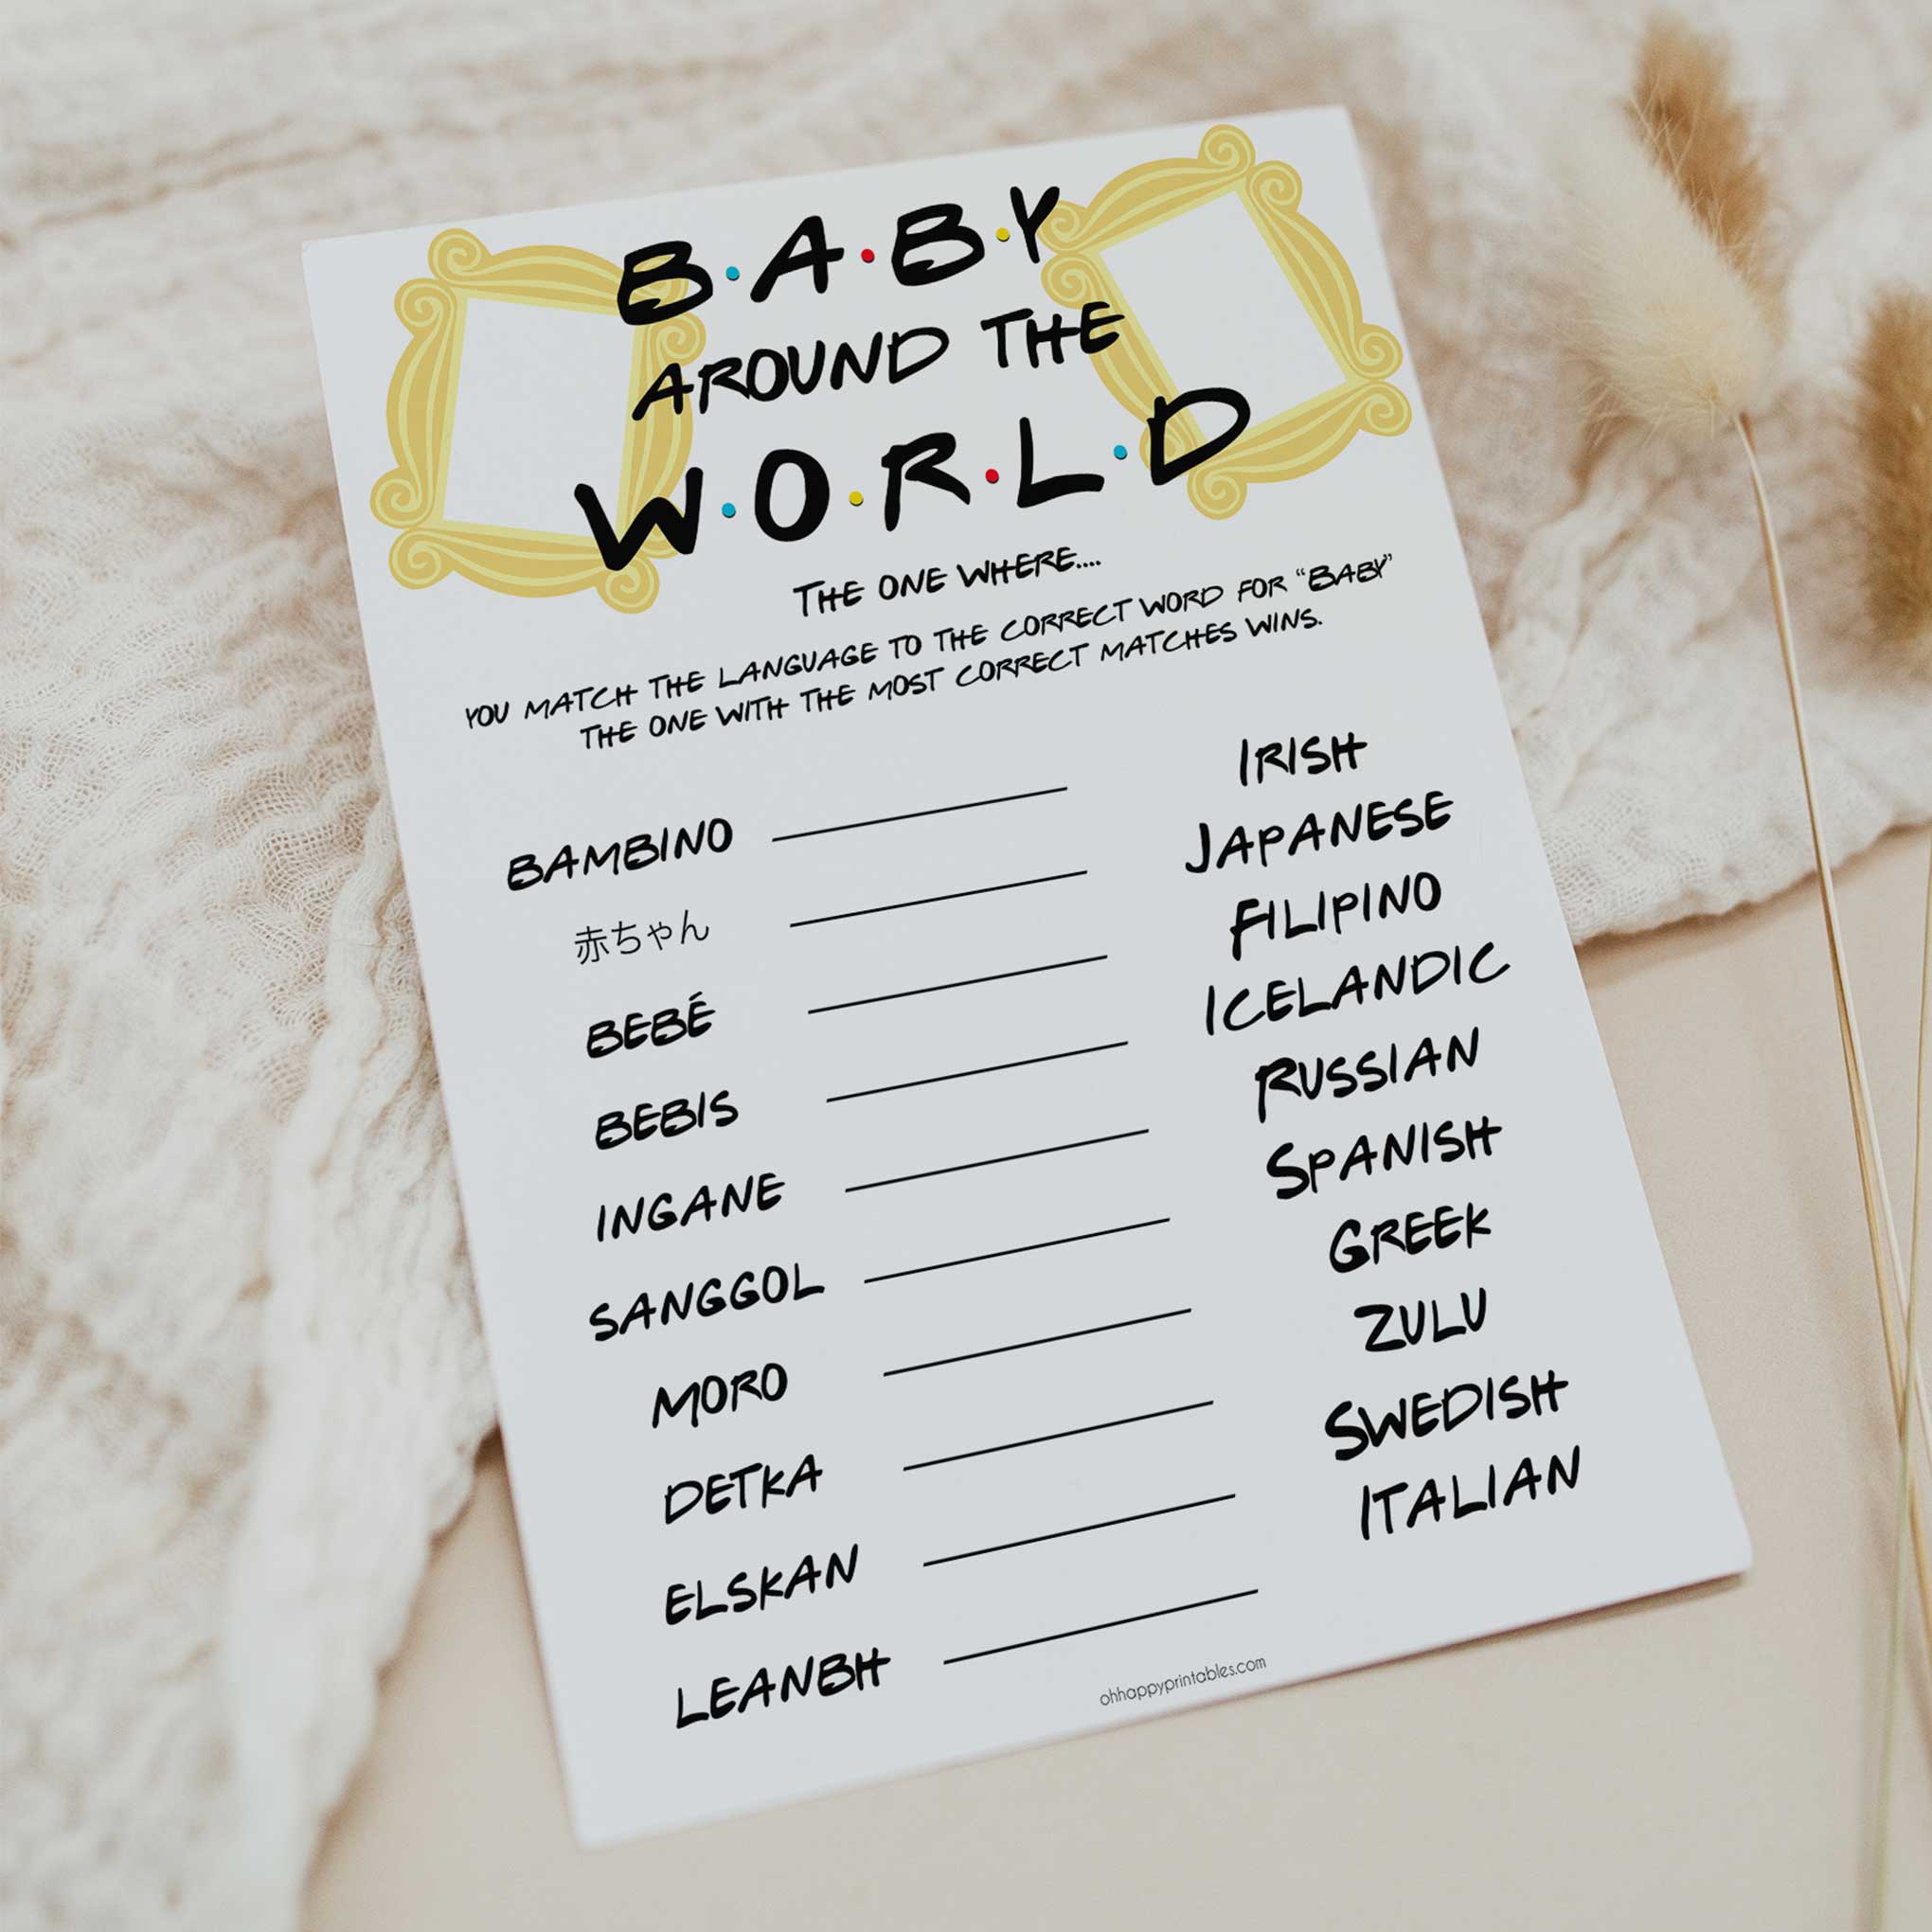 Baby Advice and Predictions Game, Printable baby shower games, friends fun baby games, baby shower games, fun baby shower ideas, top baby shower ideas, friends baby shower, friends baby shower ideas